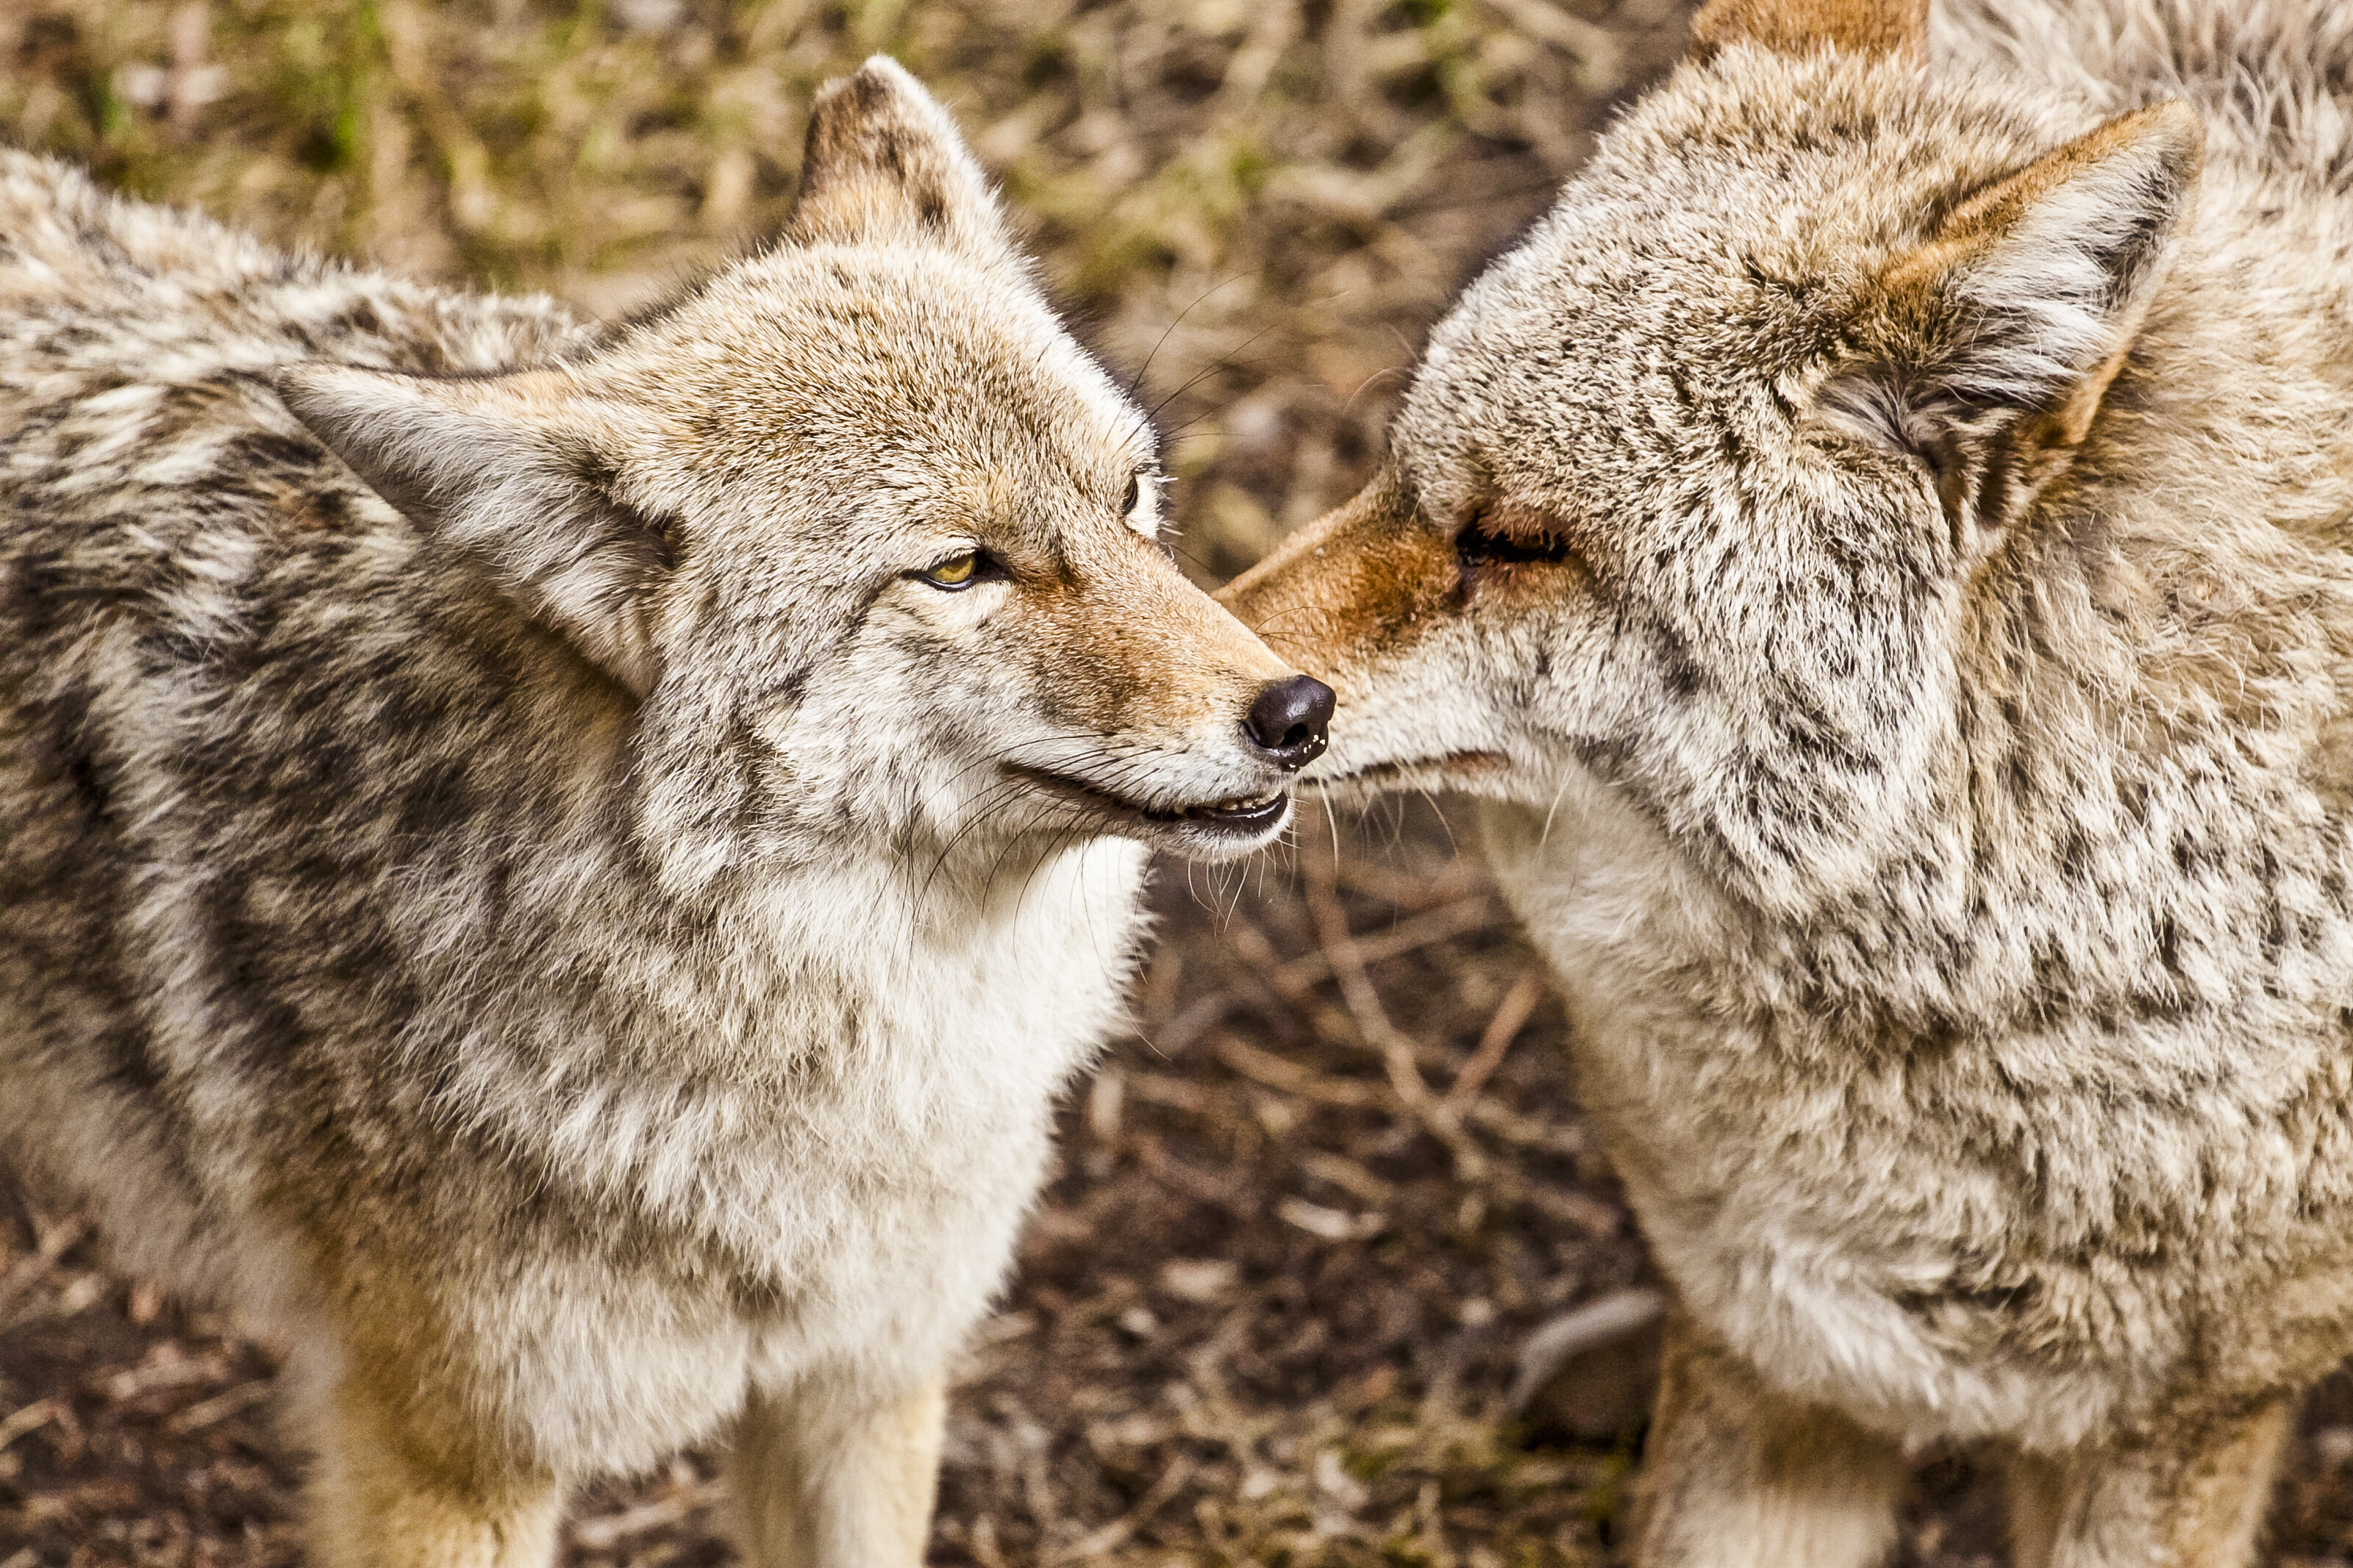 Opinion: Coyotes in Stanley Park – we need to do less killing and more learning